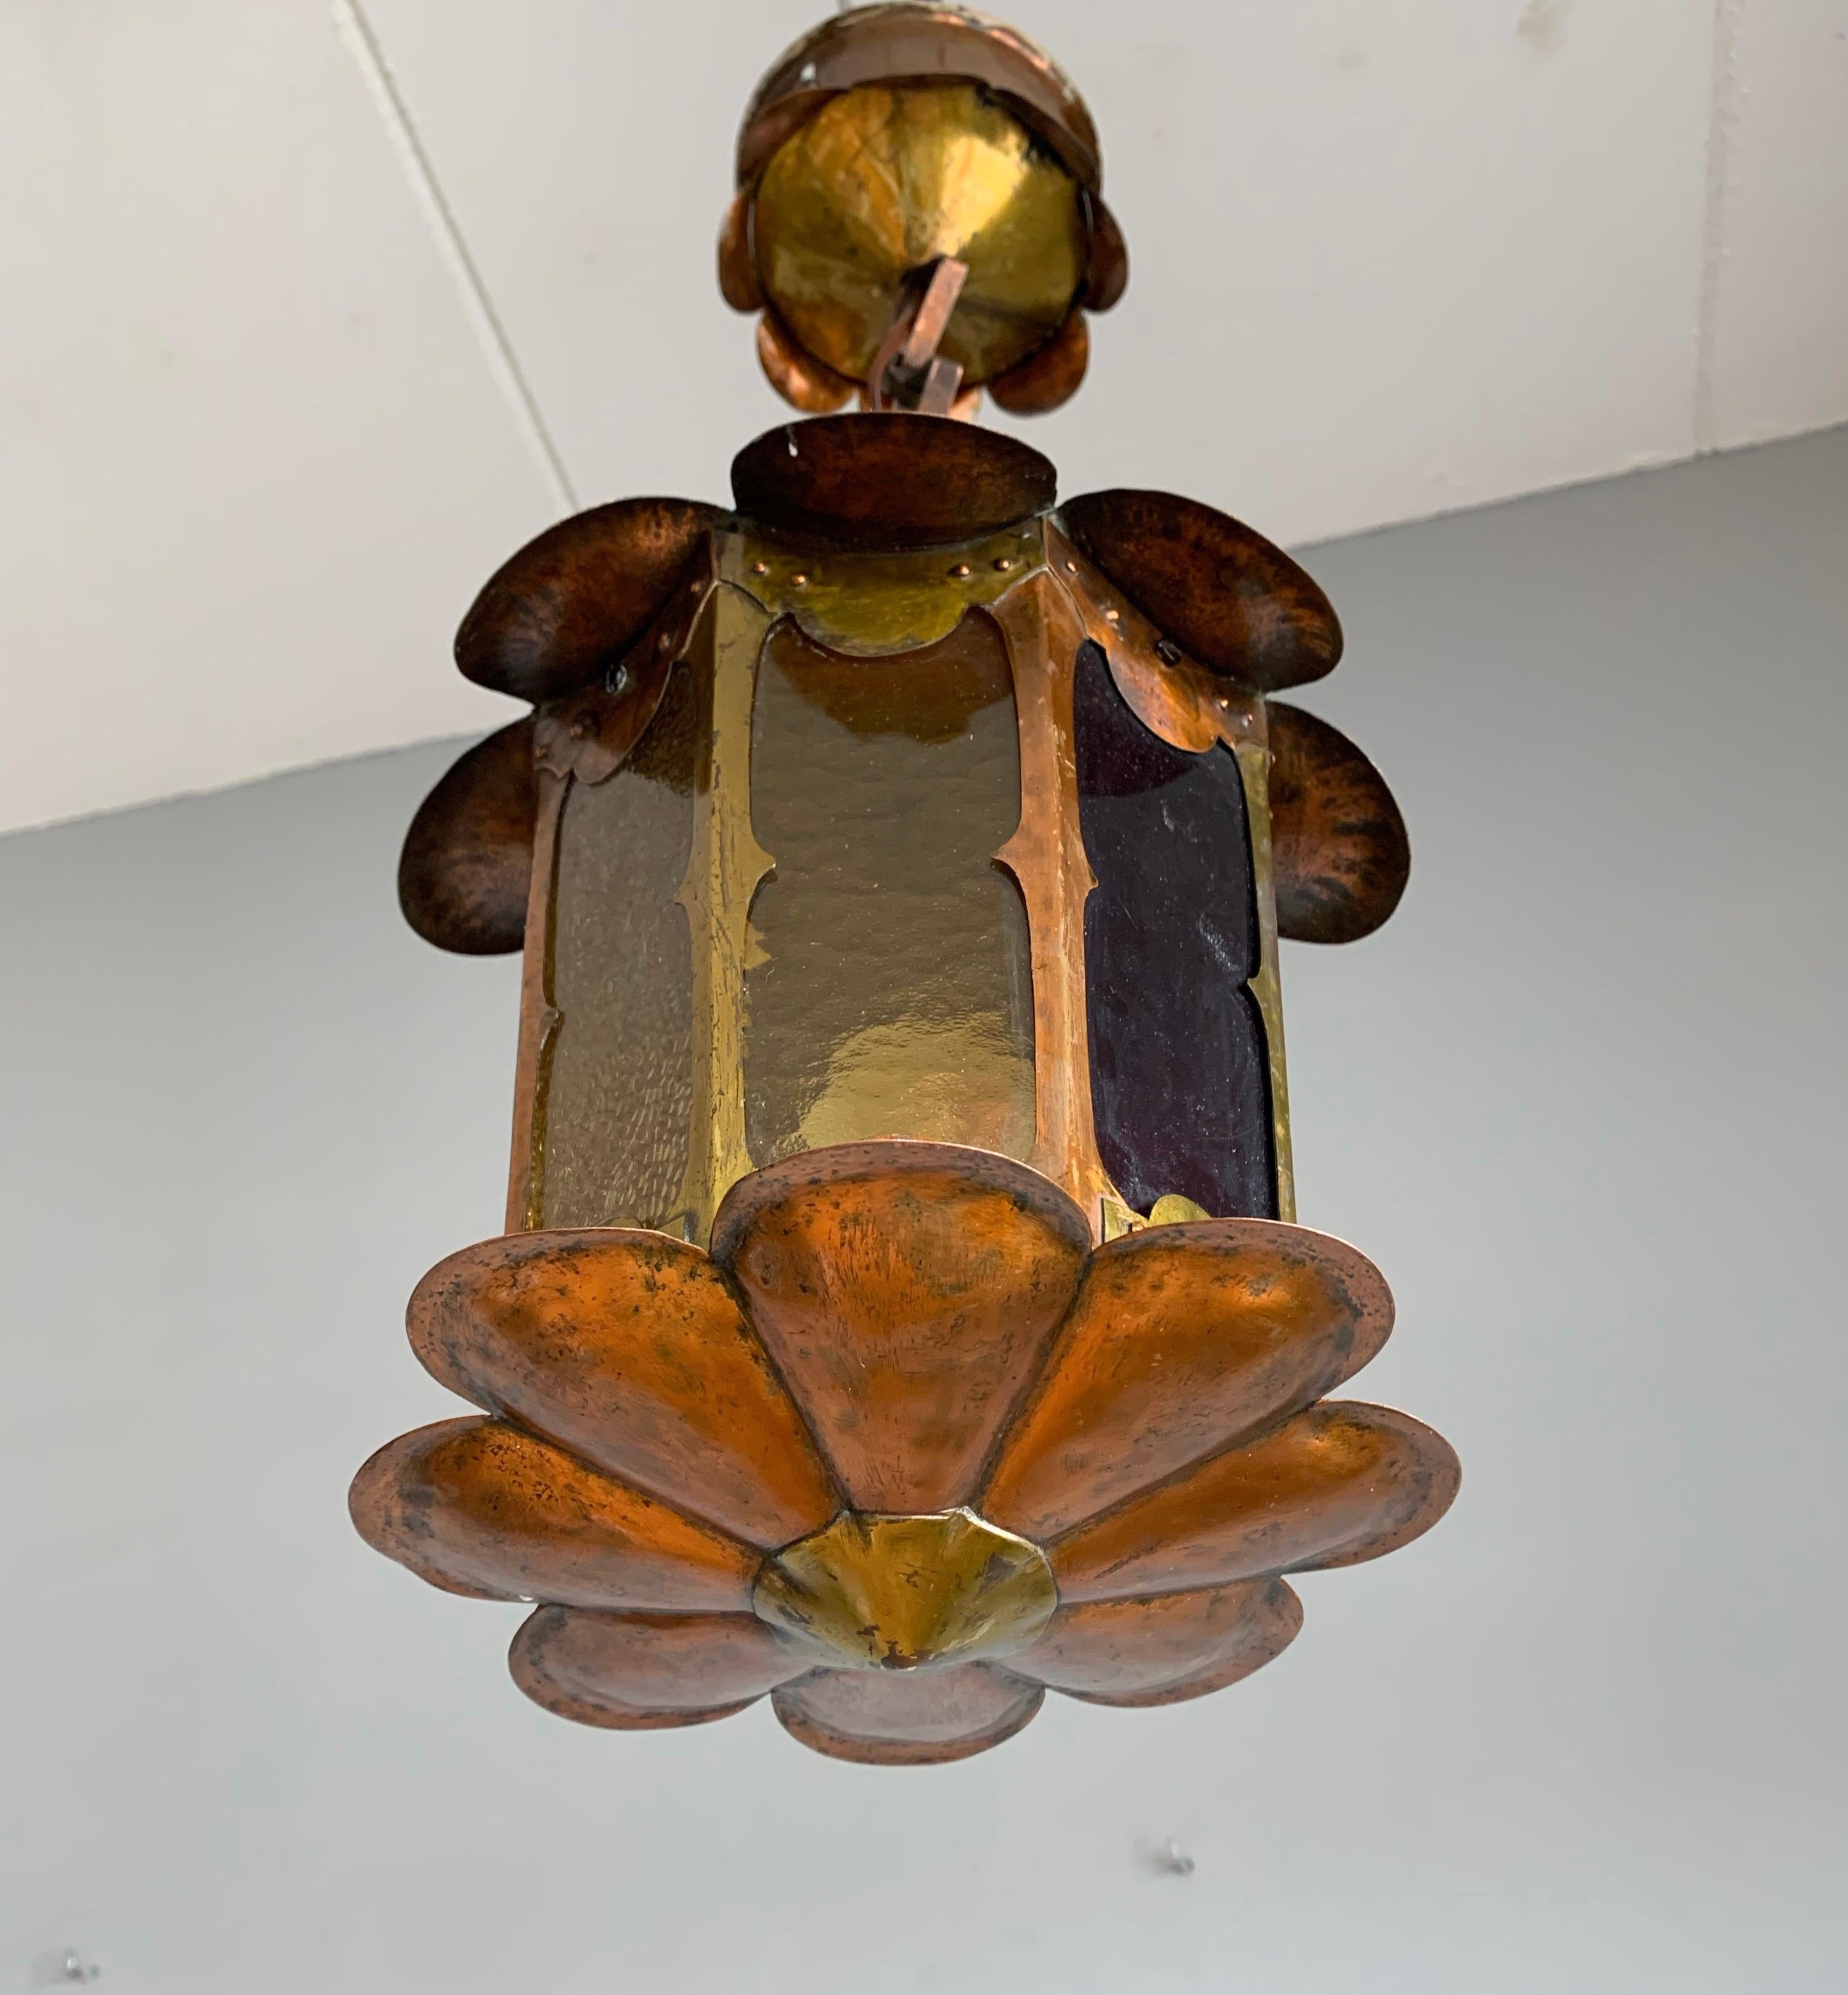 All handcrafted brass and copper light fixture of perfect design and proportions.

If you are looking for an early 1900s, stylish and top quality crafted light to grace your entry hall, landing or bedroom then look no further, because if ever there